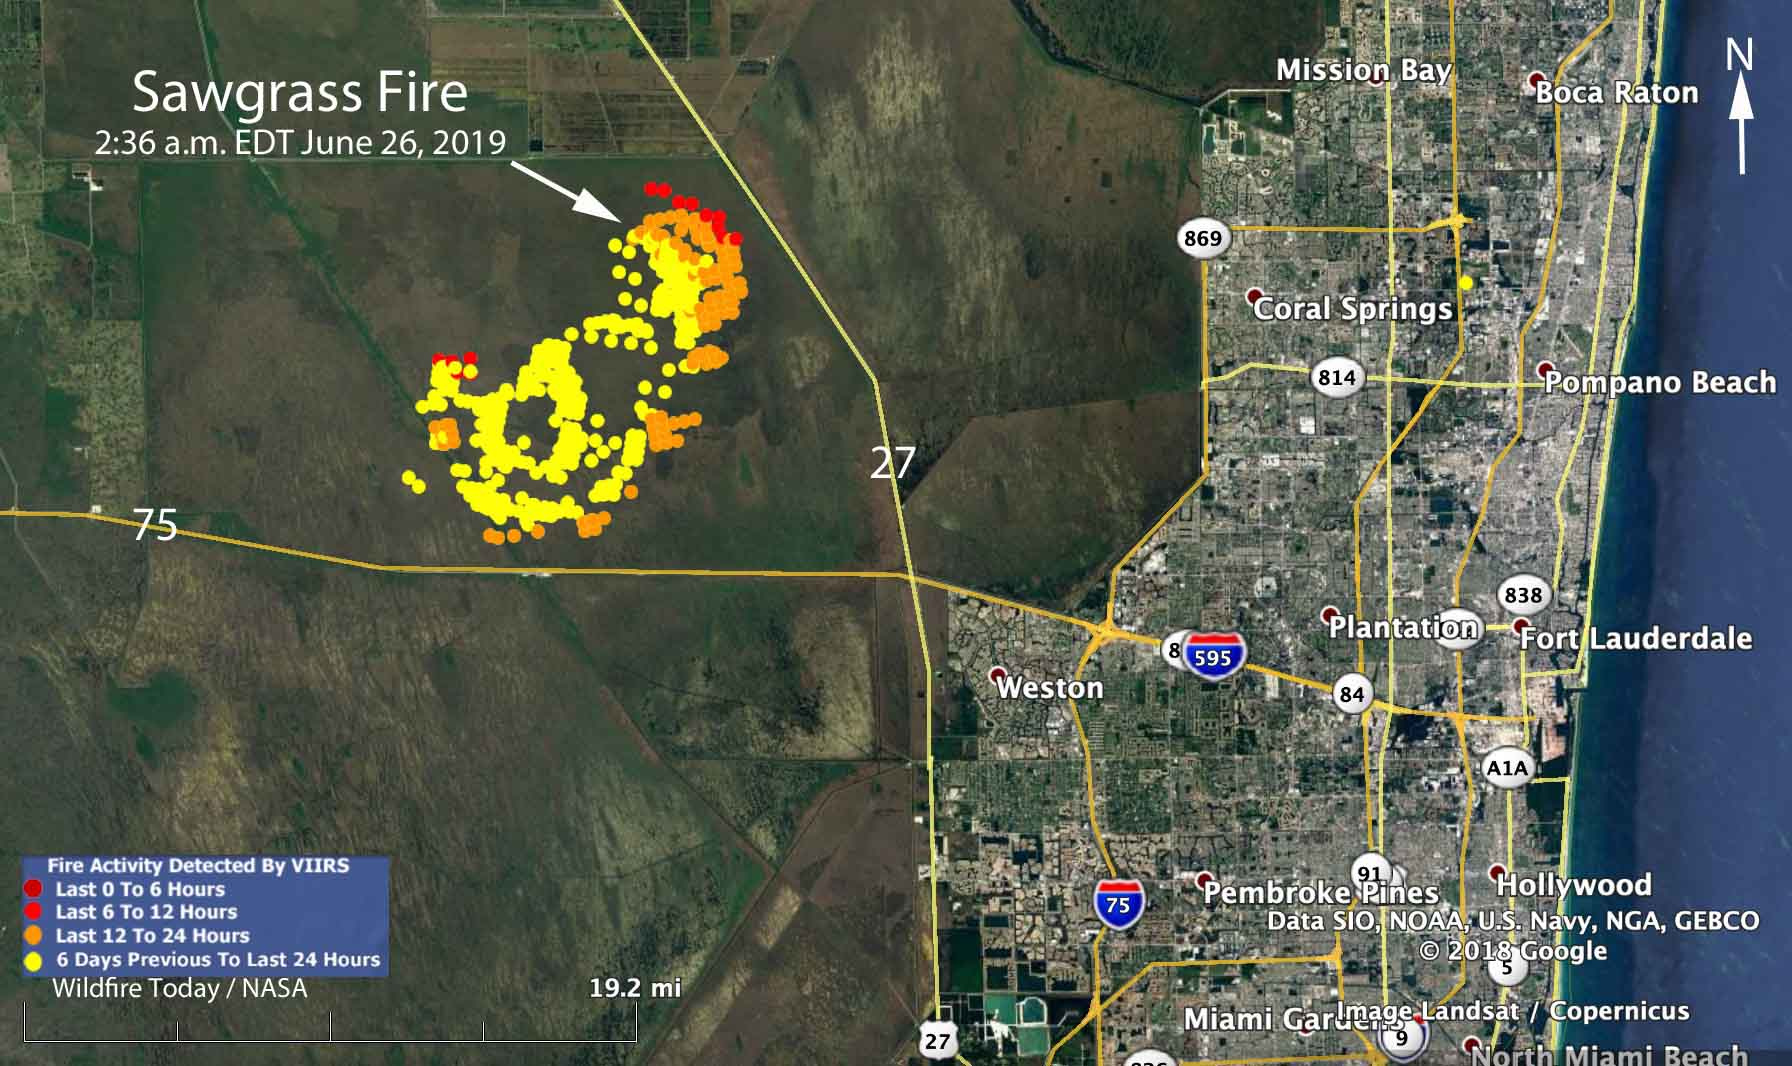 Sawgrass Fire In Florida Briefly Closes Interstate 75 Wildfire Today